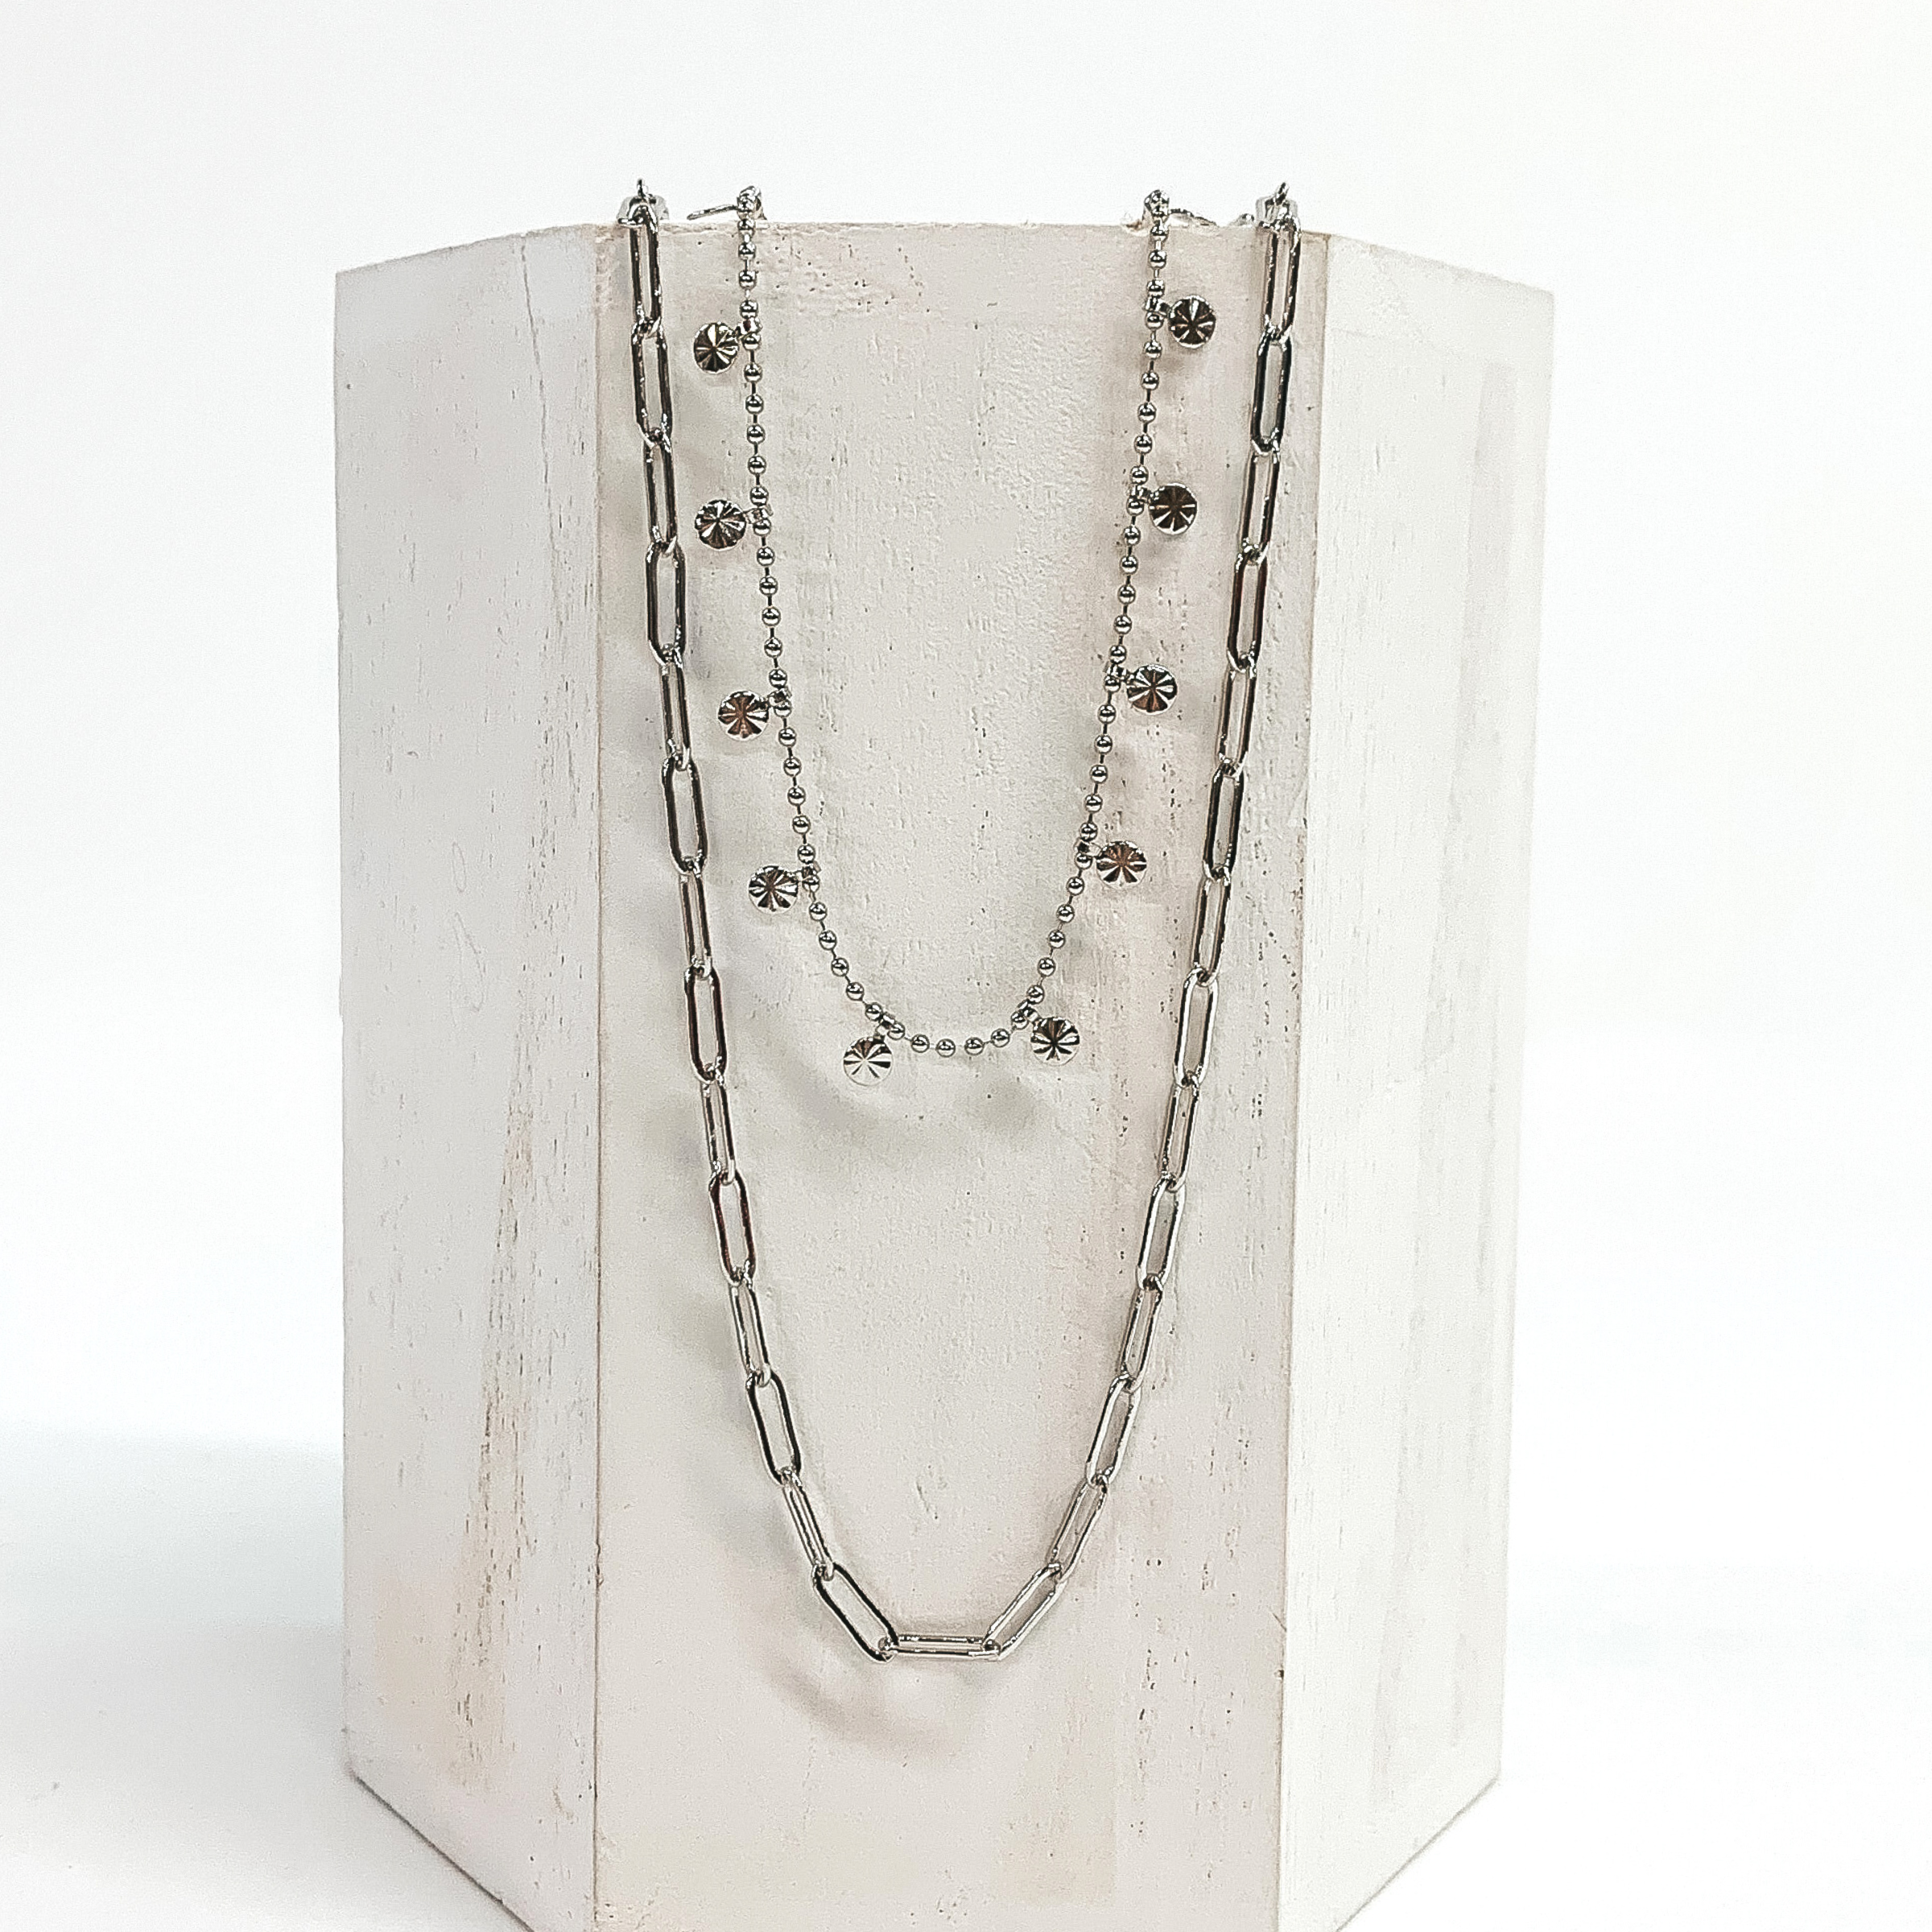 This is a silver double layered necklace. One strand is a thin paperclip chain and the second chain is a beaded chain with tiny charms with a sunburst design. This necklace is pictured on a white block and on a white background.